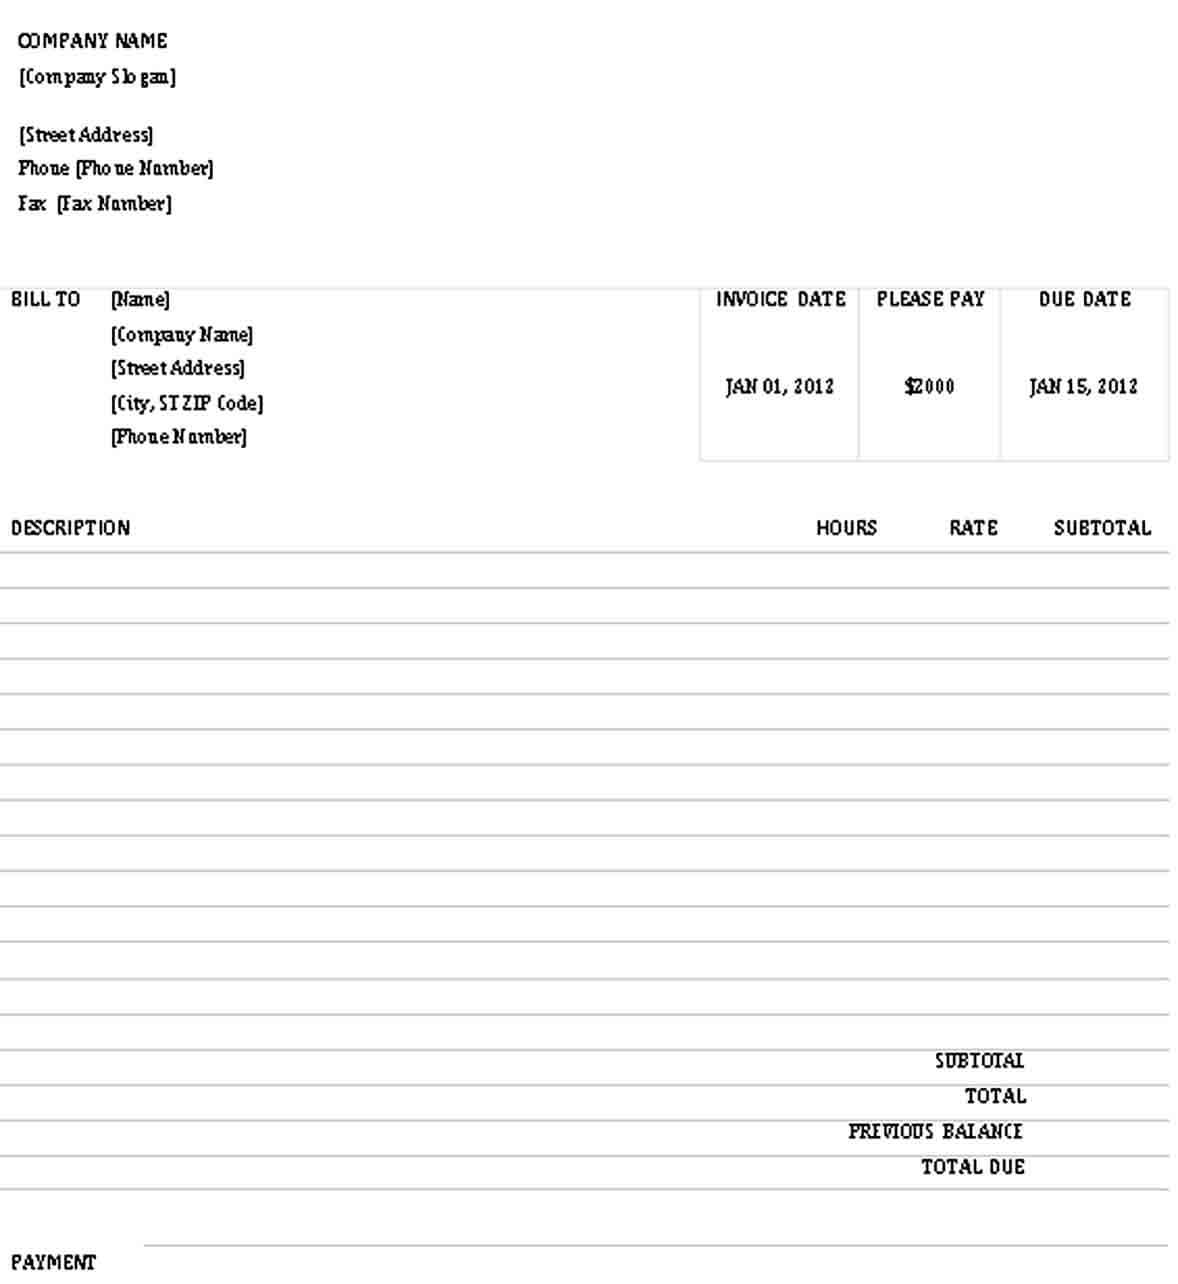 Business Invoice Receipt Doc Free Download